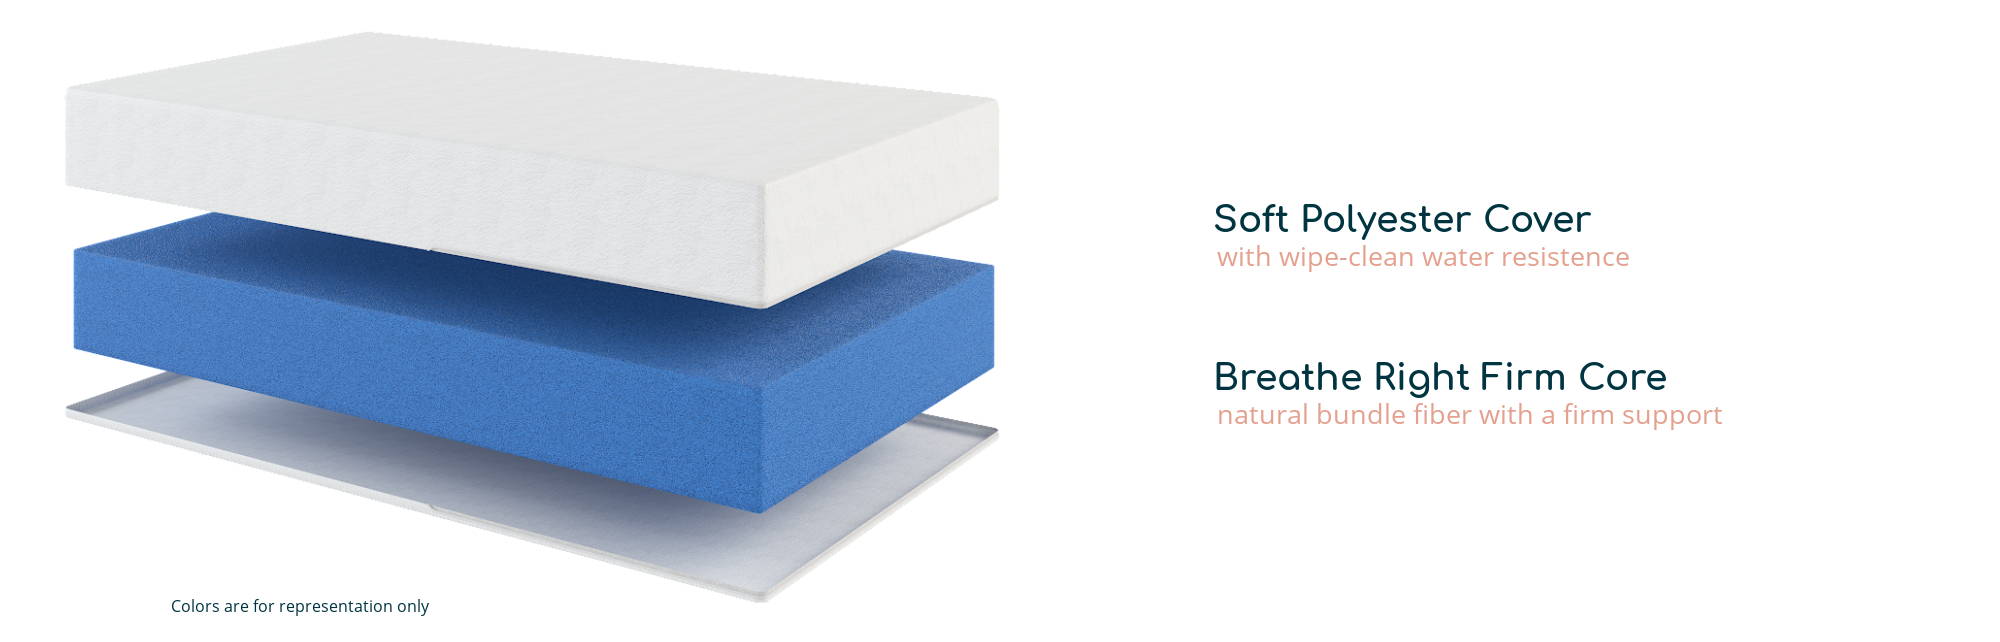 Soft Polyester Cover-with wipe clean resistance and Breathe Right Firm Core-natural bundle fiber with a firm support